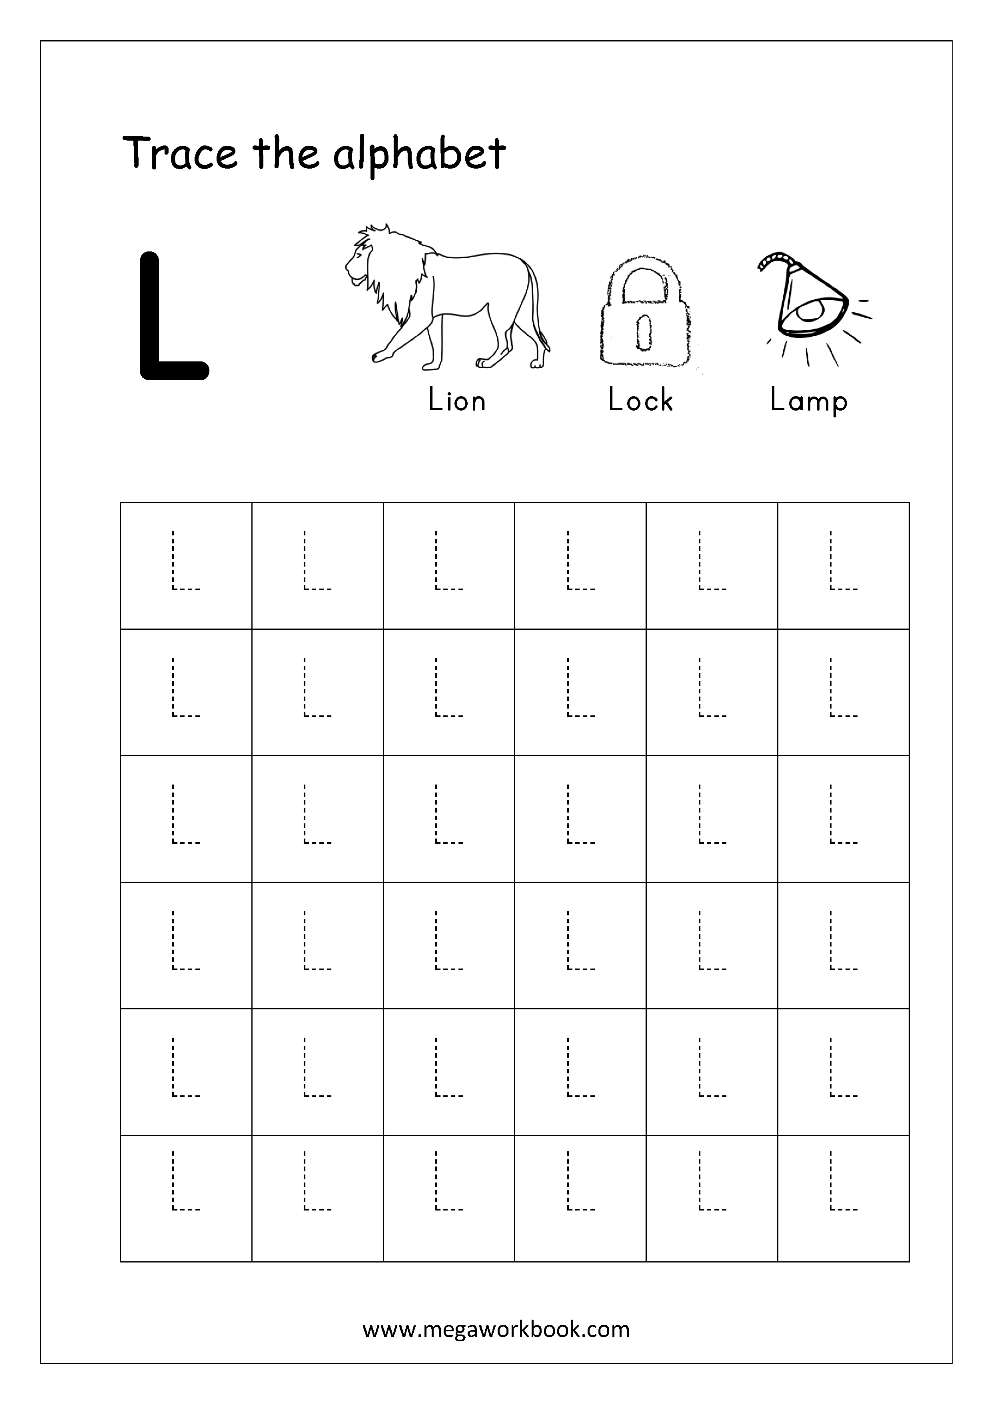 free-capital-letter-tracing-worksheets-letter-tracing-worksheets